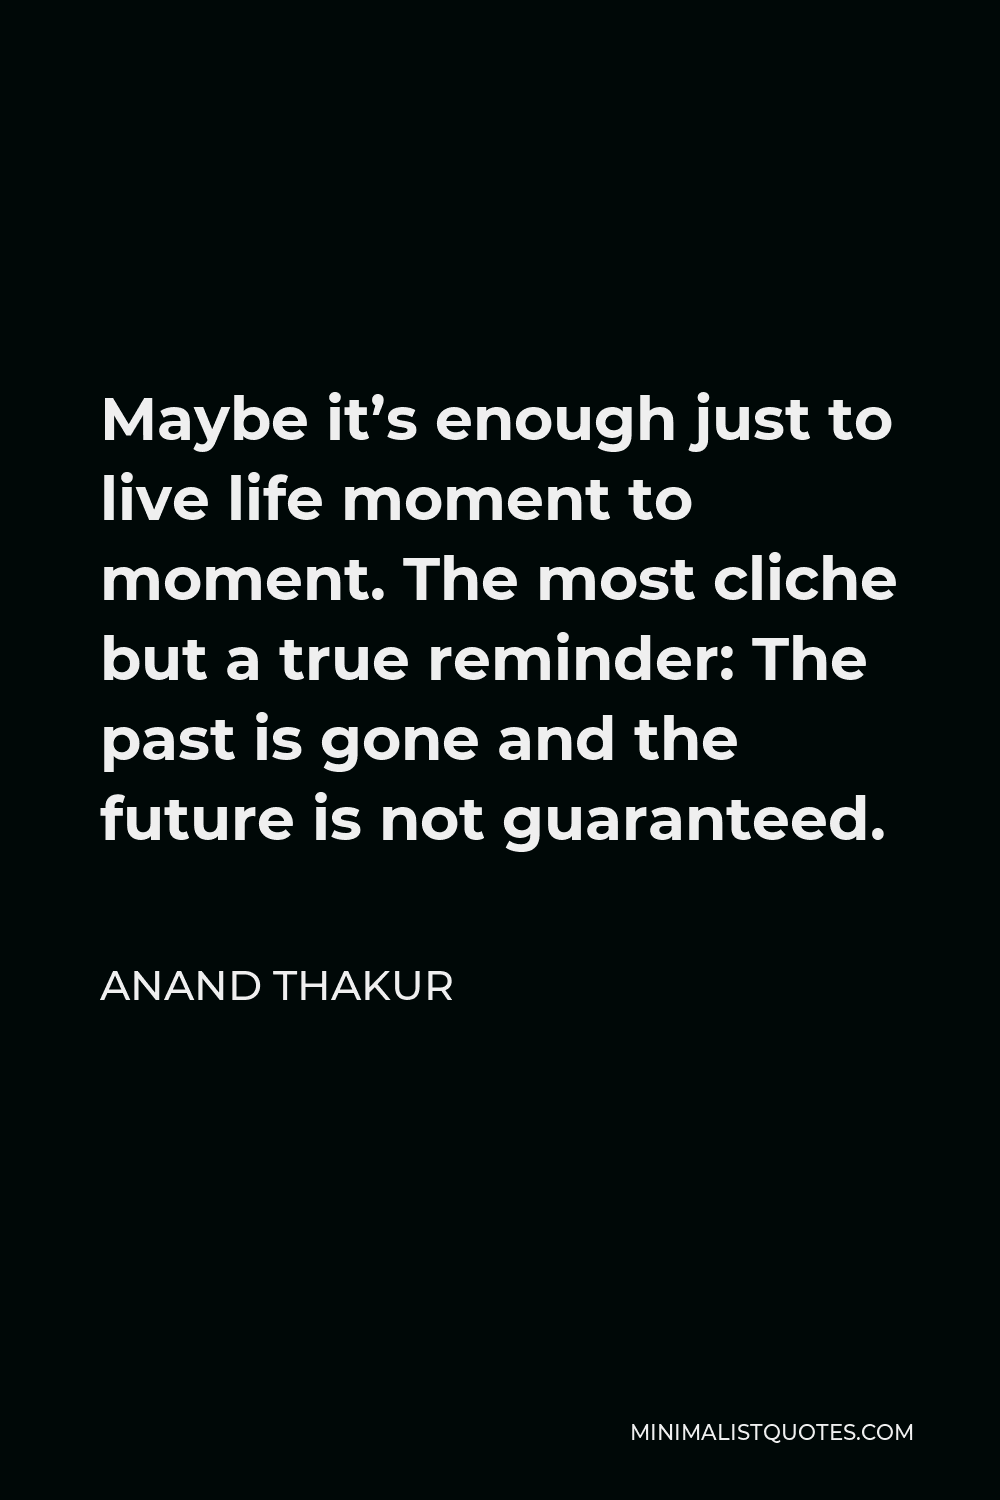 Anand Thakur Quote - Maybe it’s enough just to live life moment to moment. The most cliche but a true reminder: The past is gone and the future is not guaranteed.